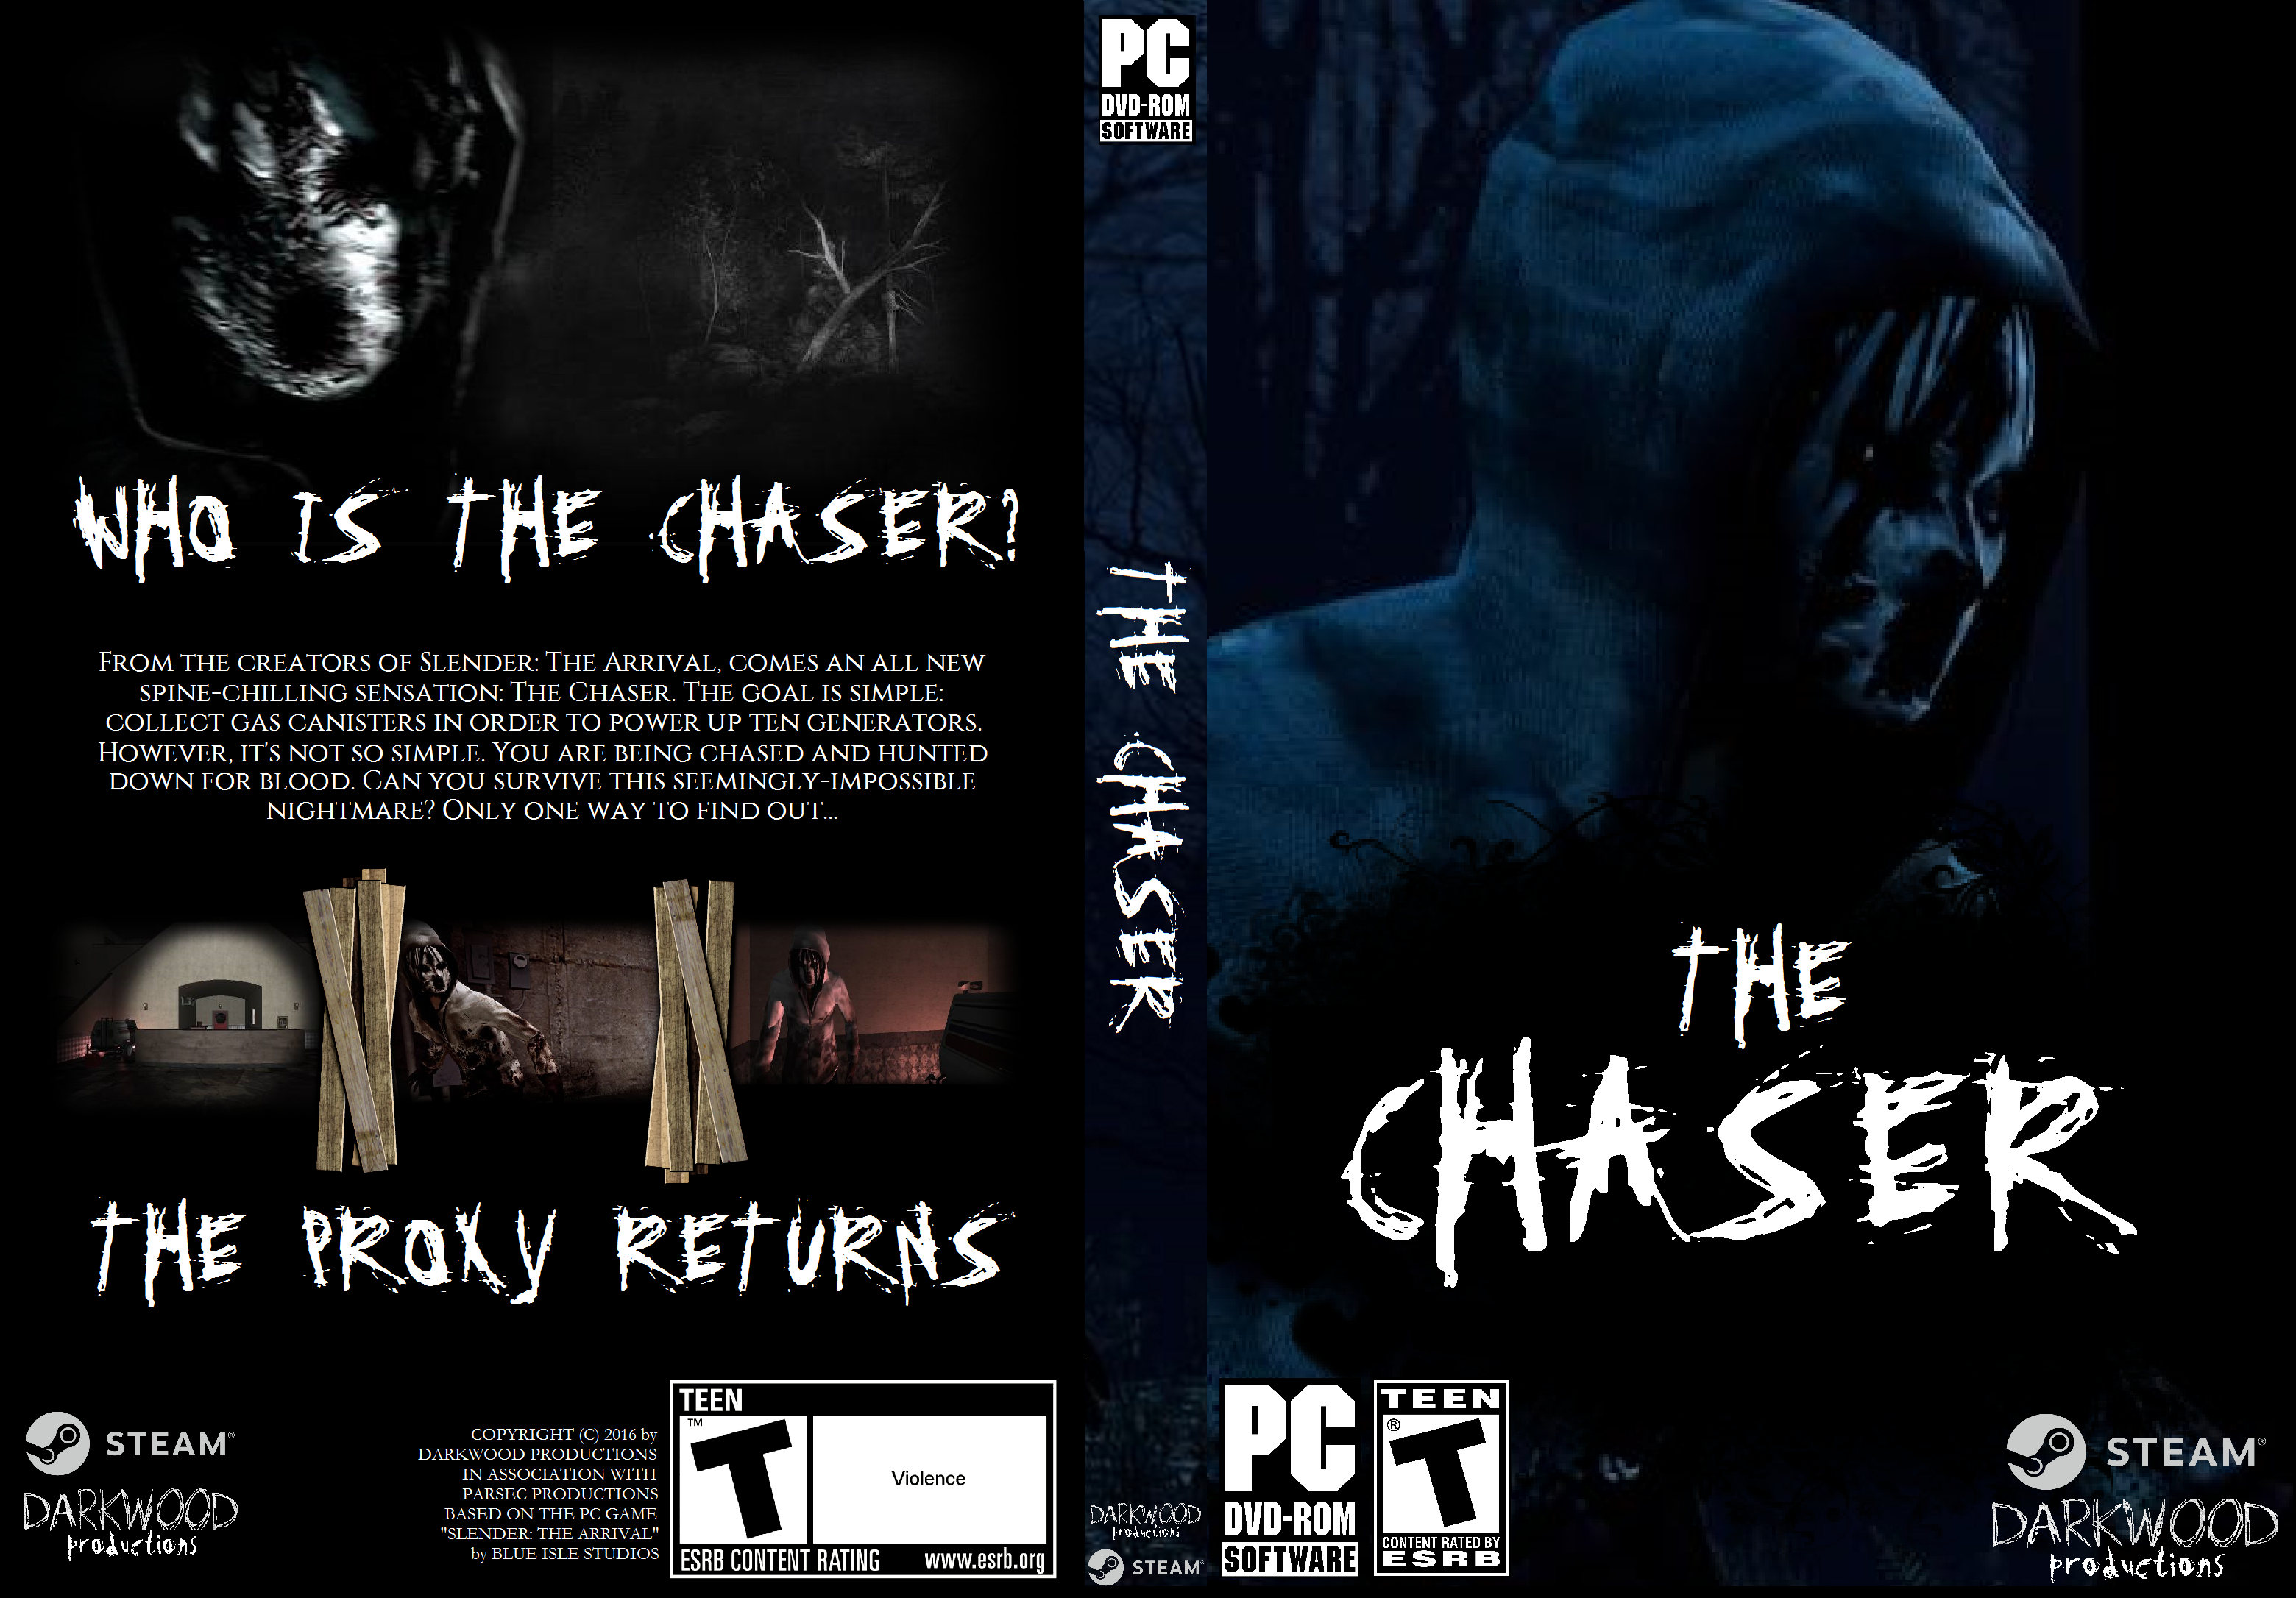 the chaser dvd cover full 4 image - Indie DB